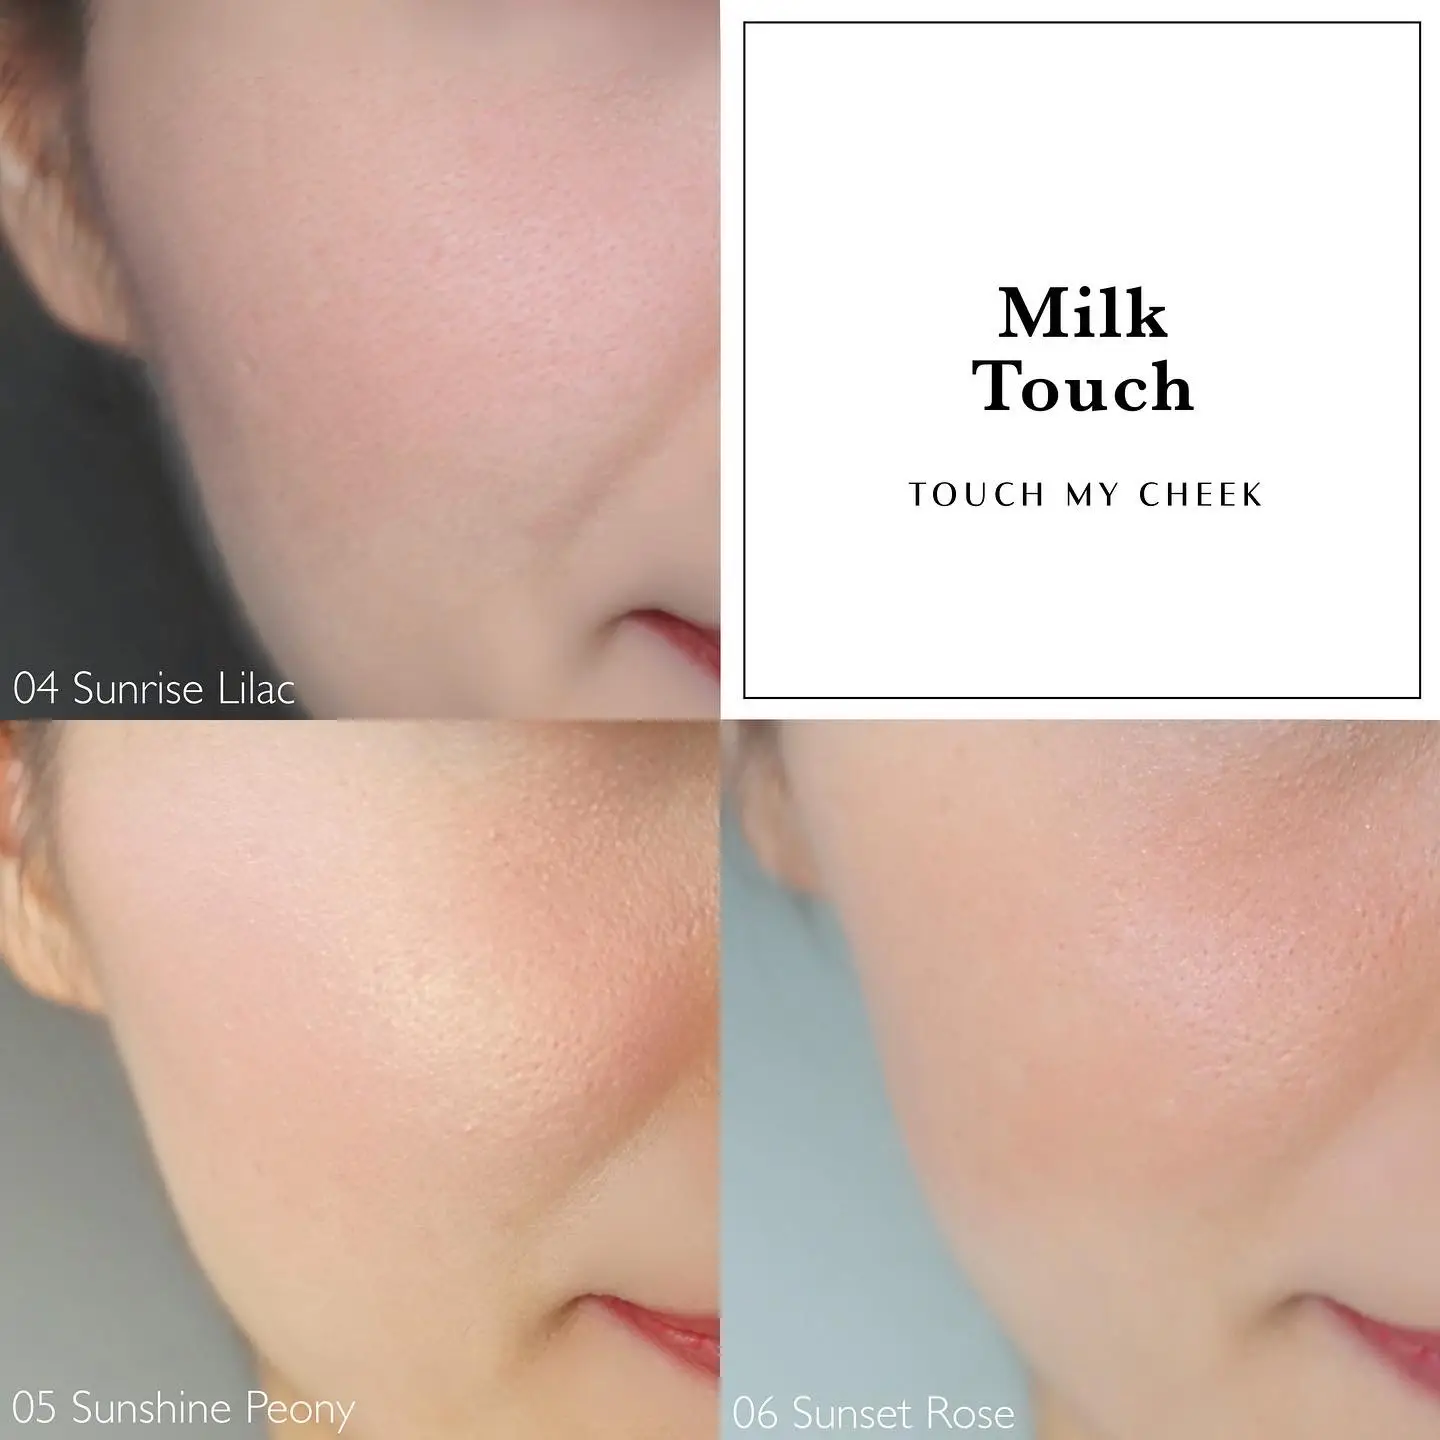  MILKTOUCH Touch My Cheek in Bloom Blush - Airy